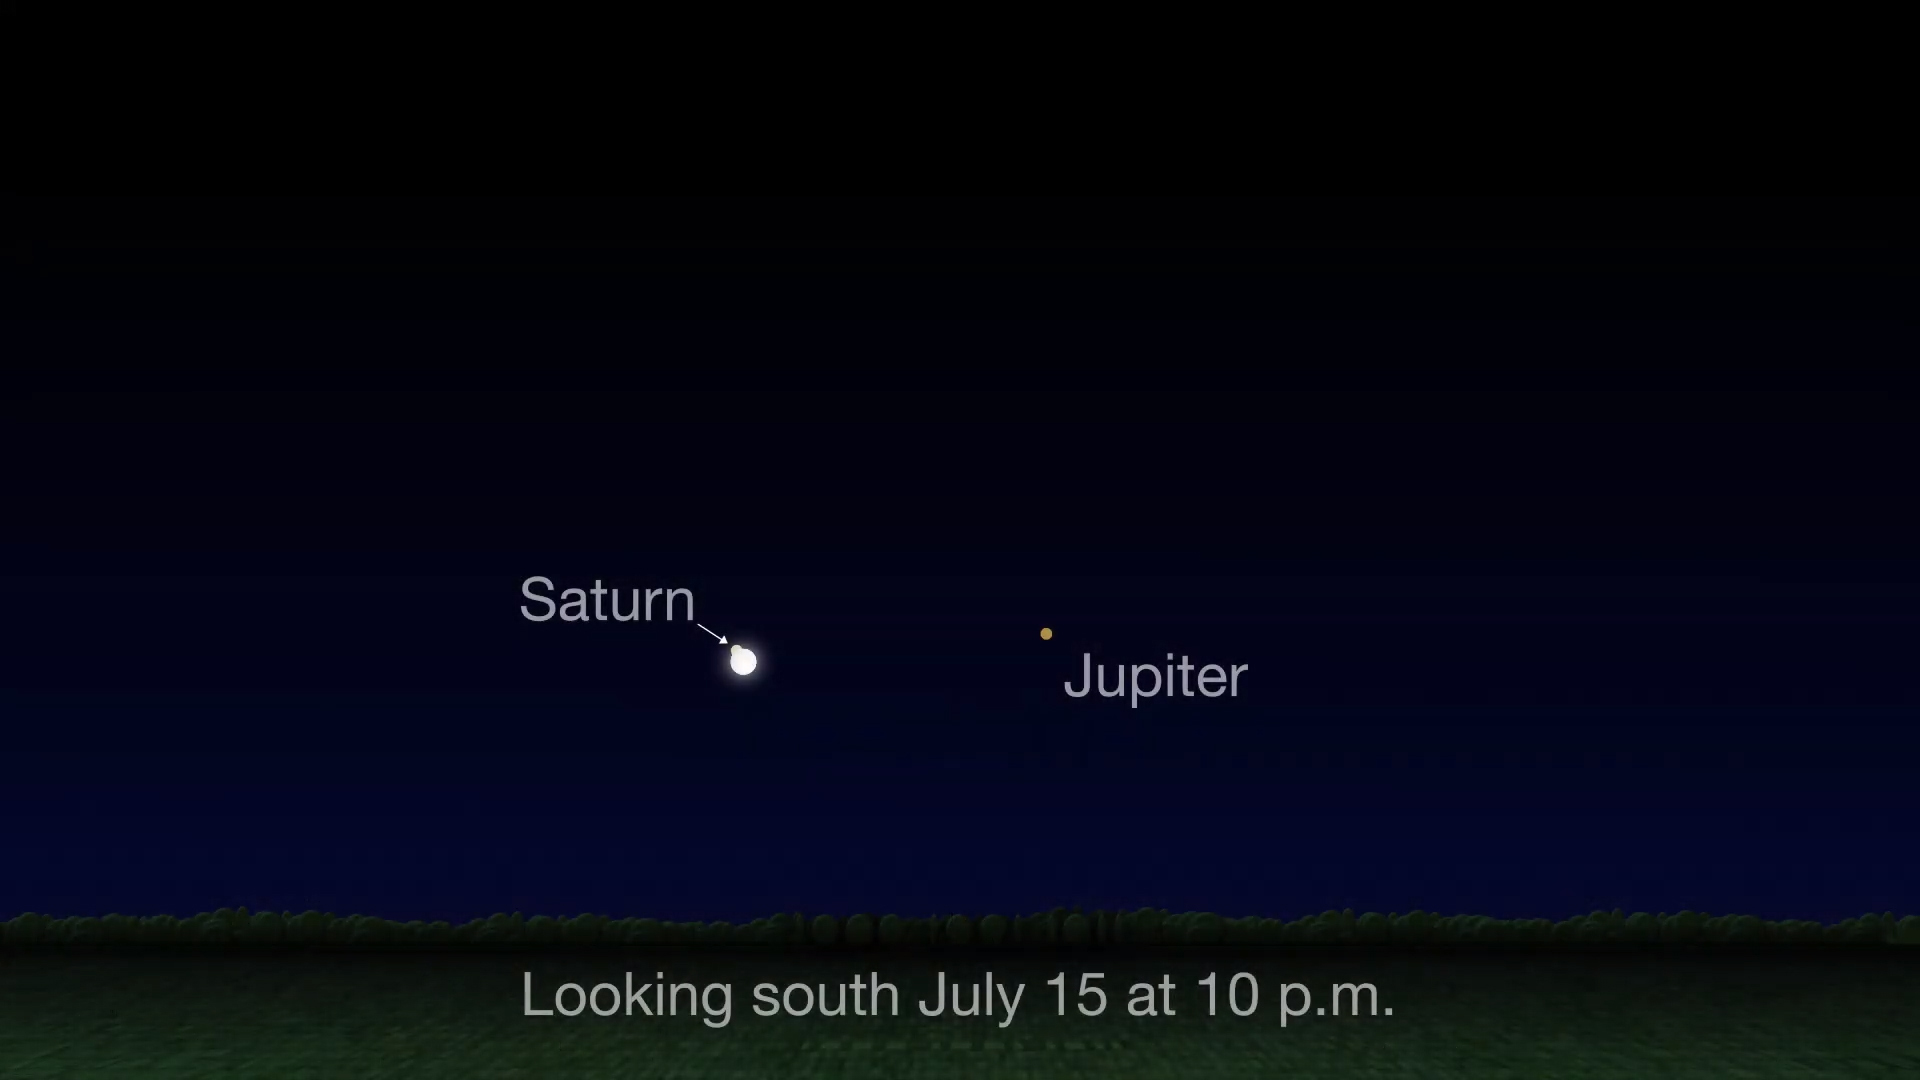 Chart showing the Moon and Jupiter near the Moon on July 15.